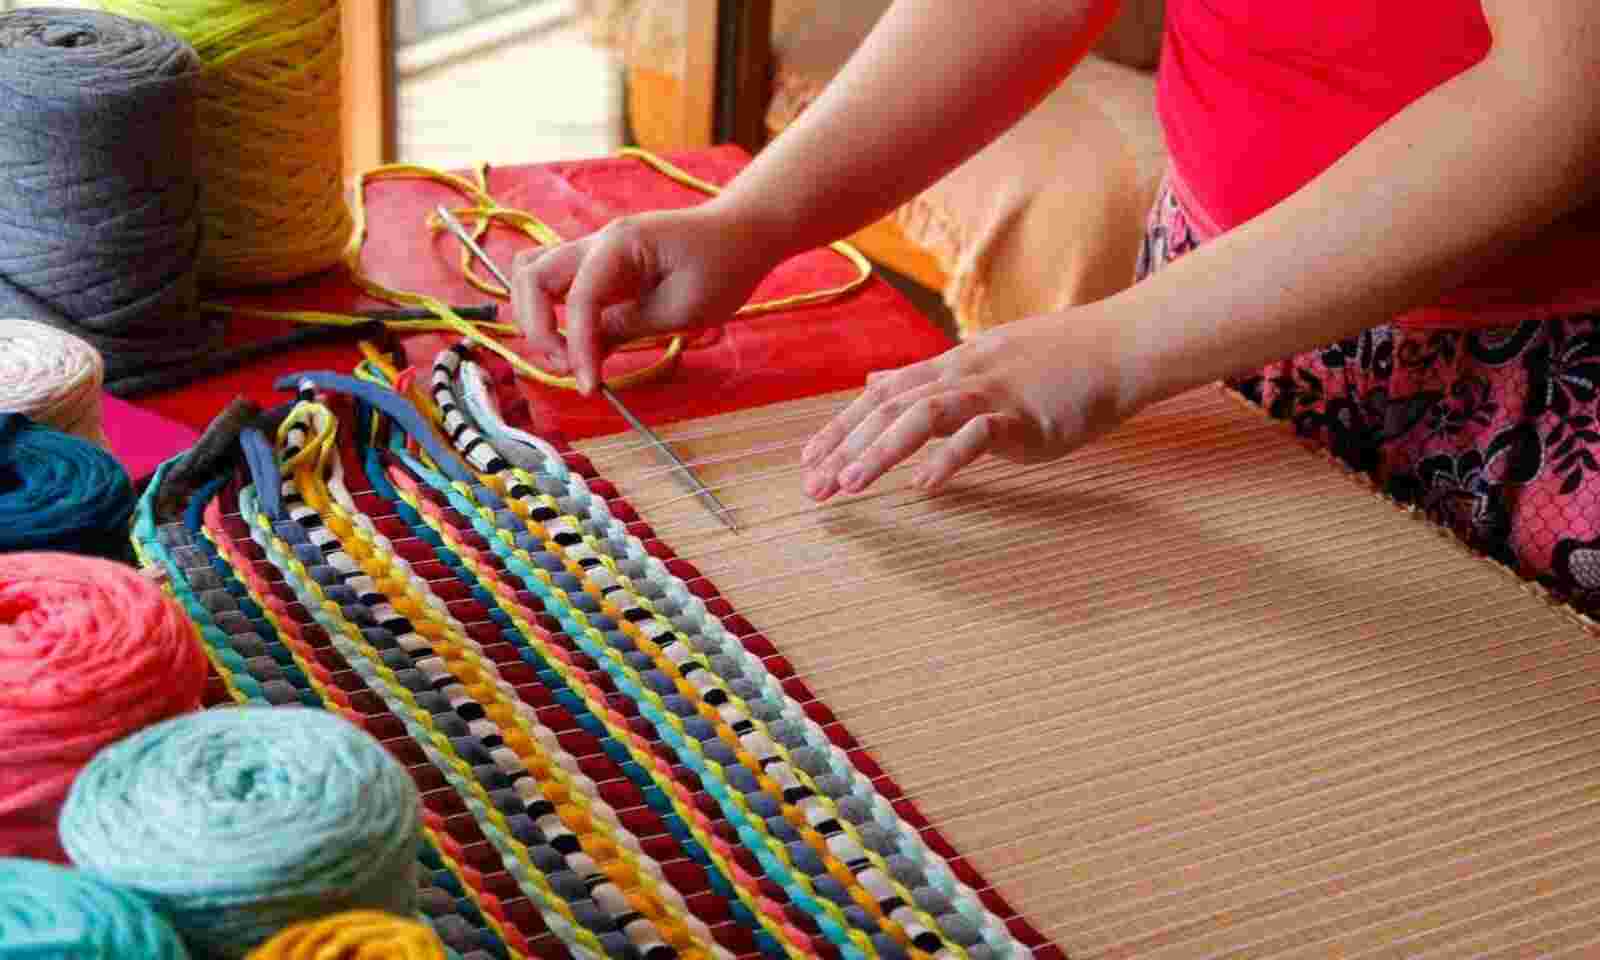 A handmade rug makes for a great festive gift